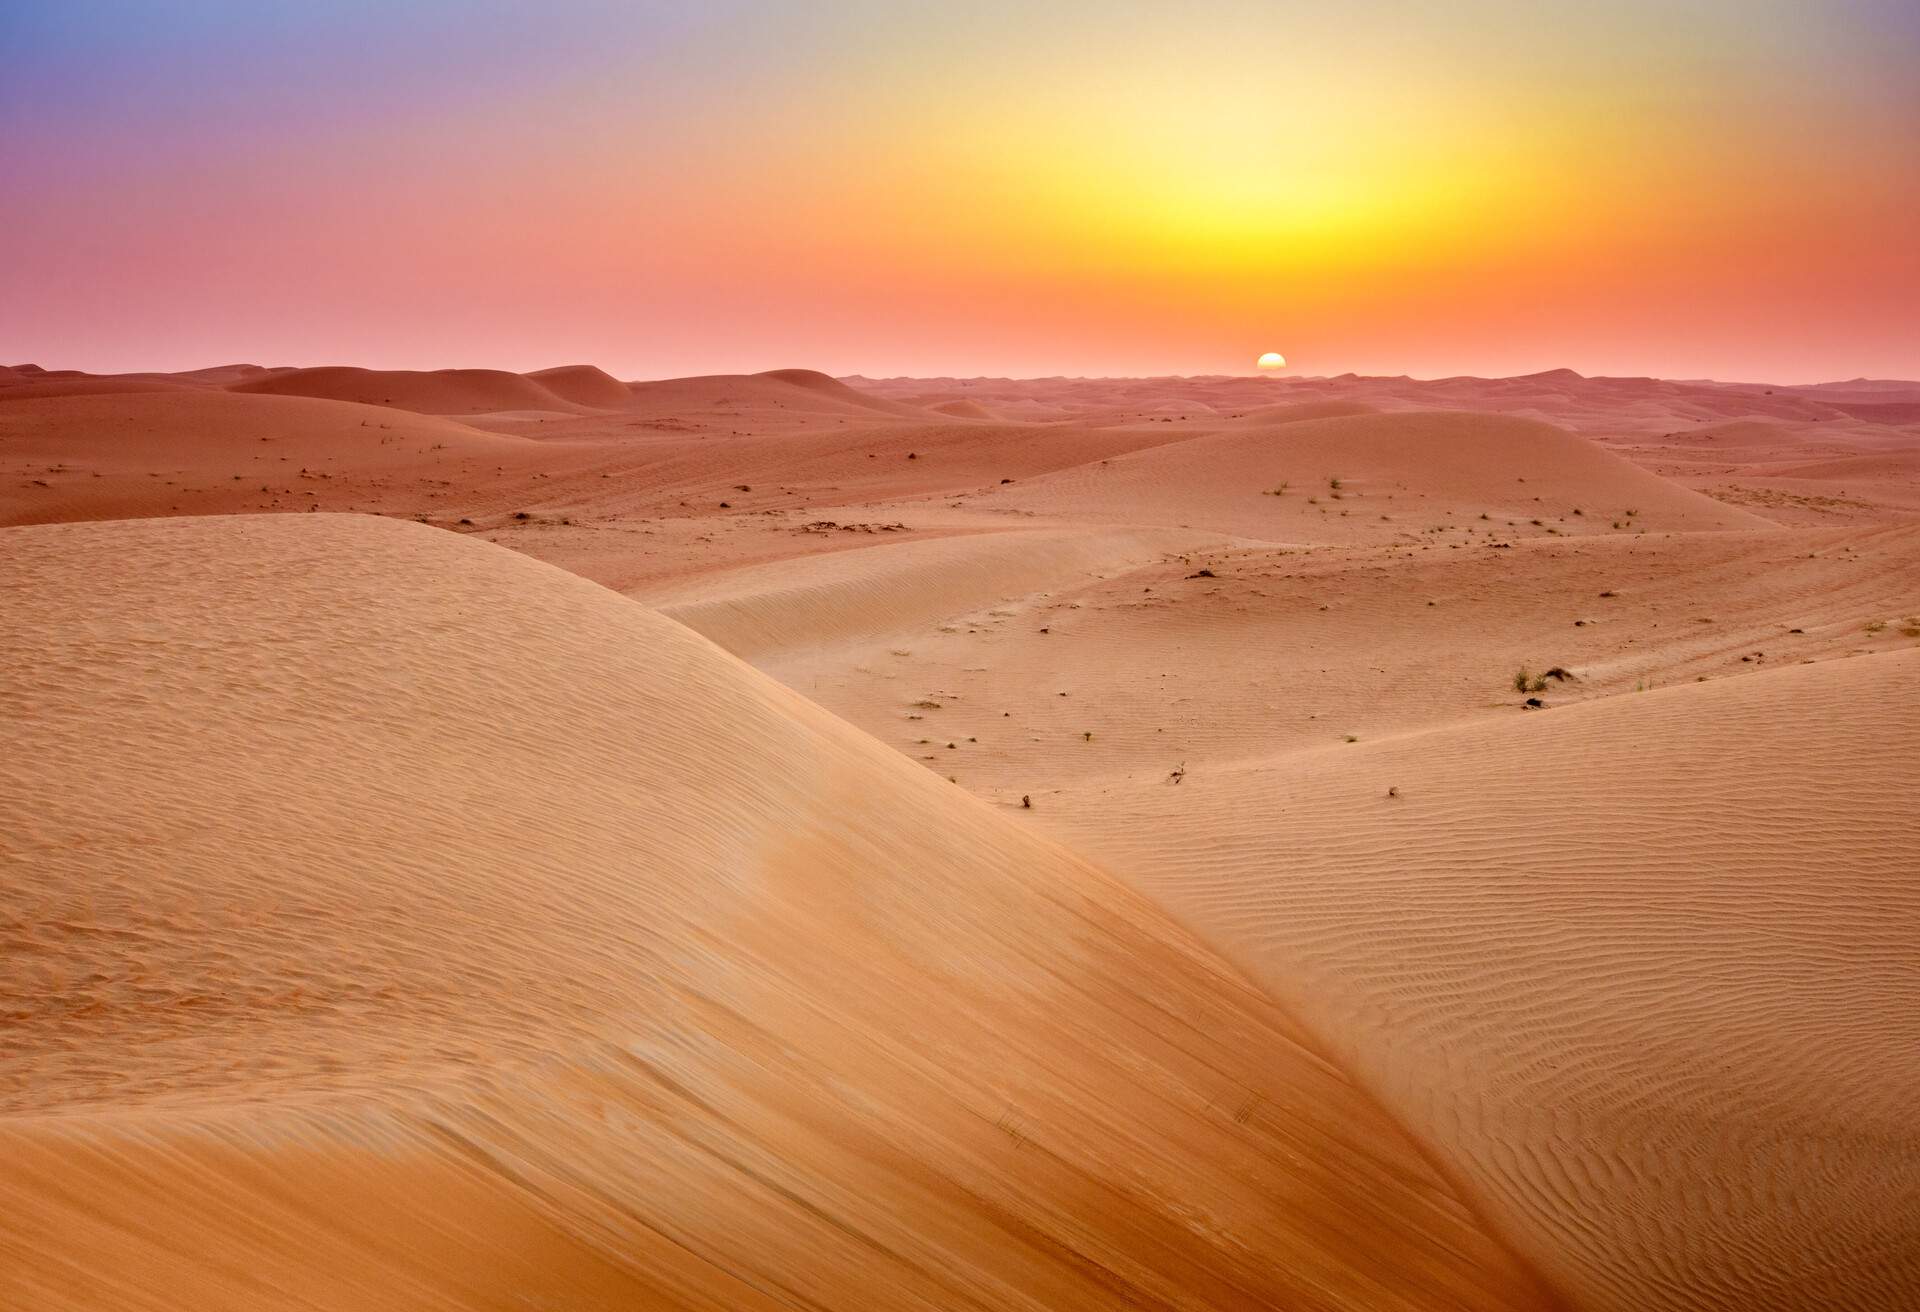 Beautiful sand dunes in a desert with views of sunrise on the horizon.